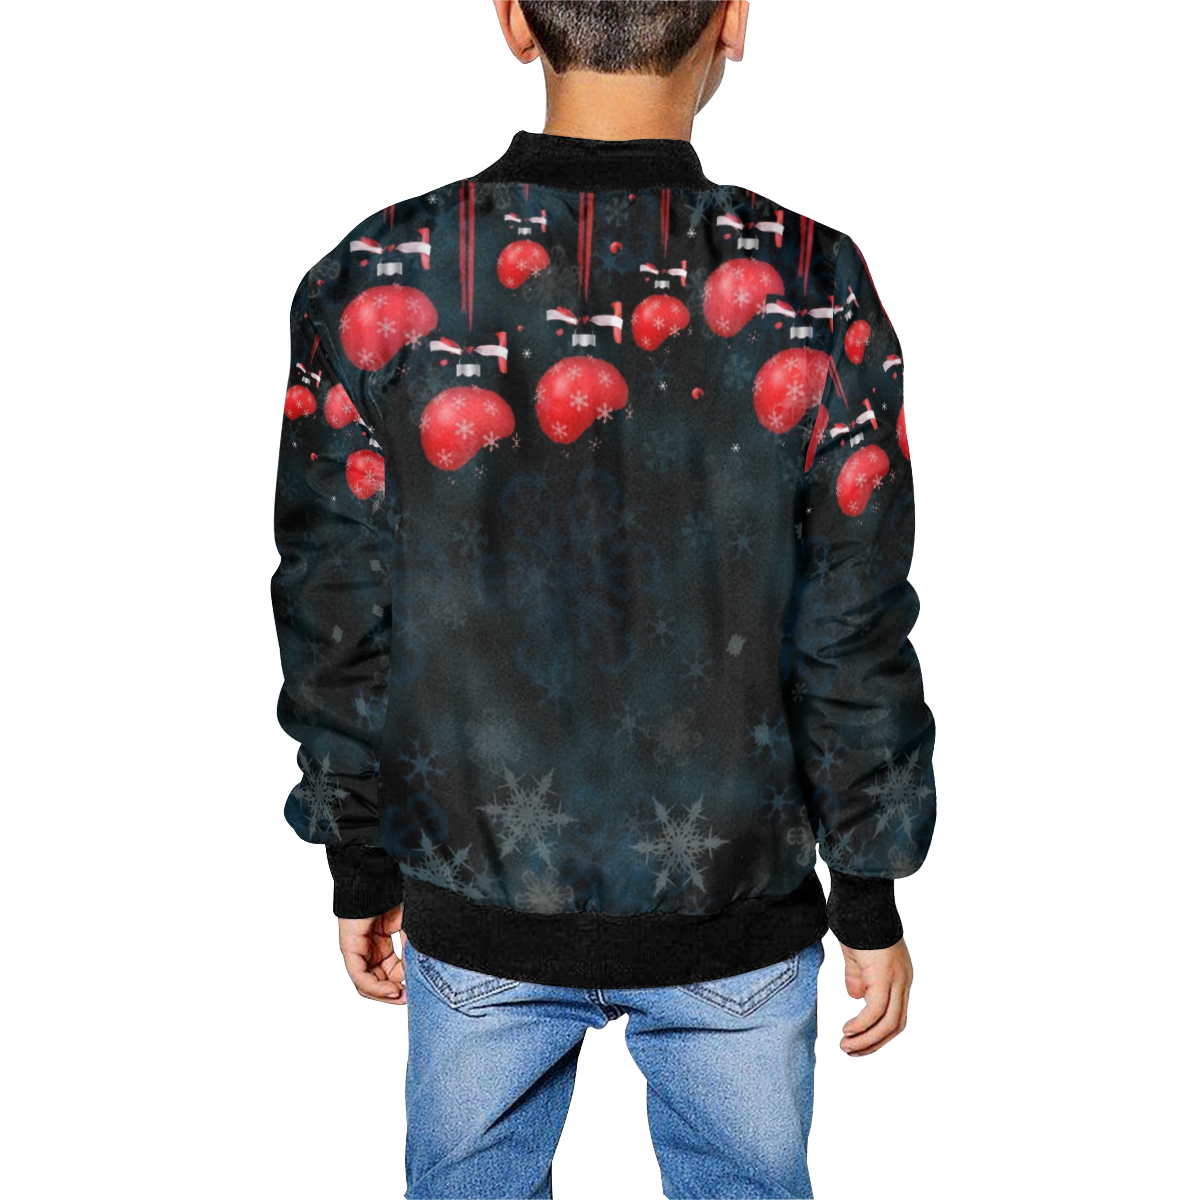 Christmas by Nico Bielow Kids' All Over Print Bomber Jacket (Model H40)